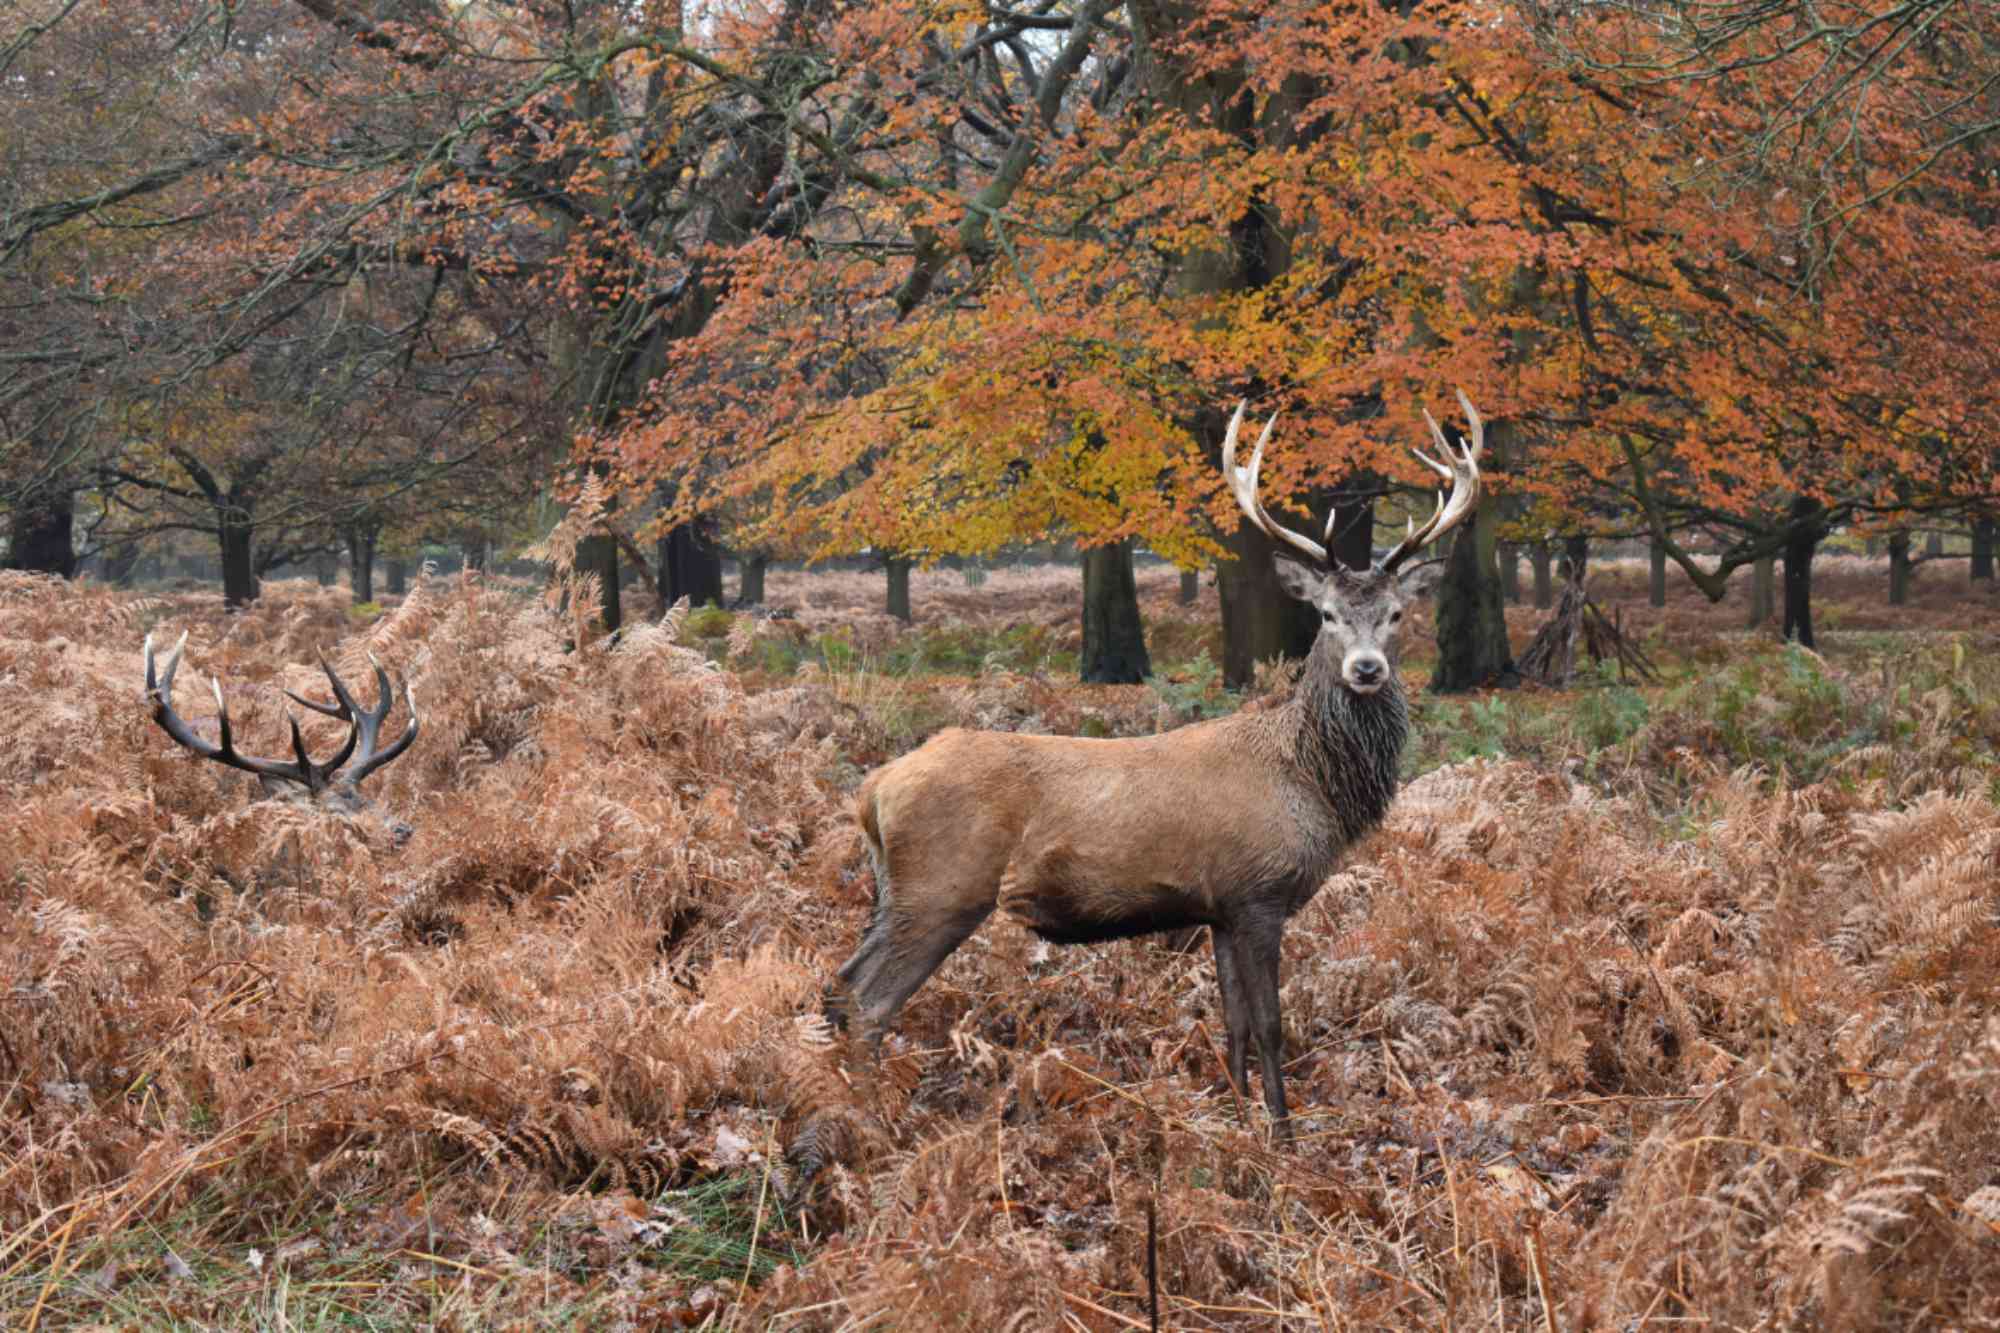 Red deer in a autumnal forest in the UK